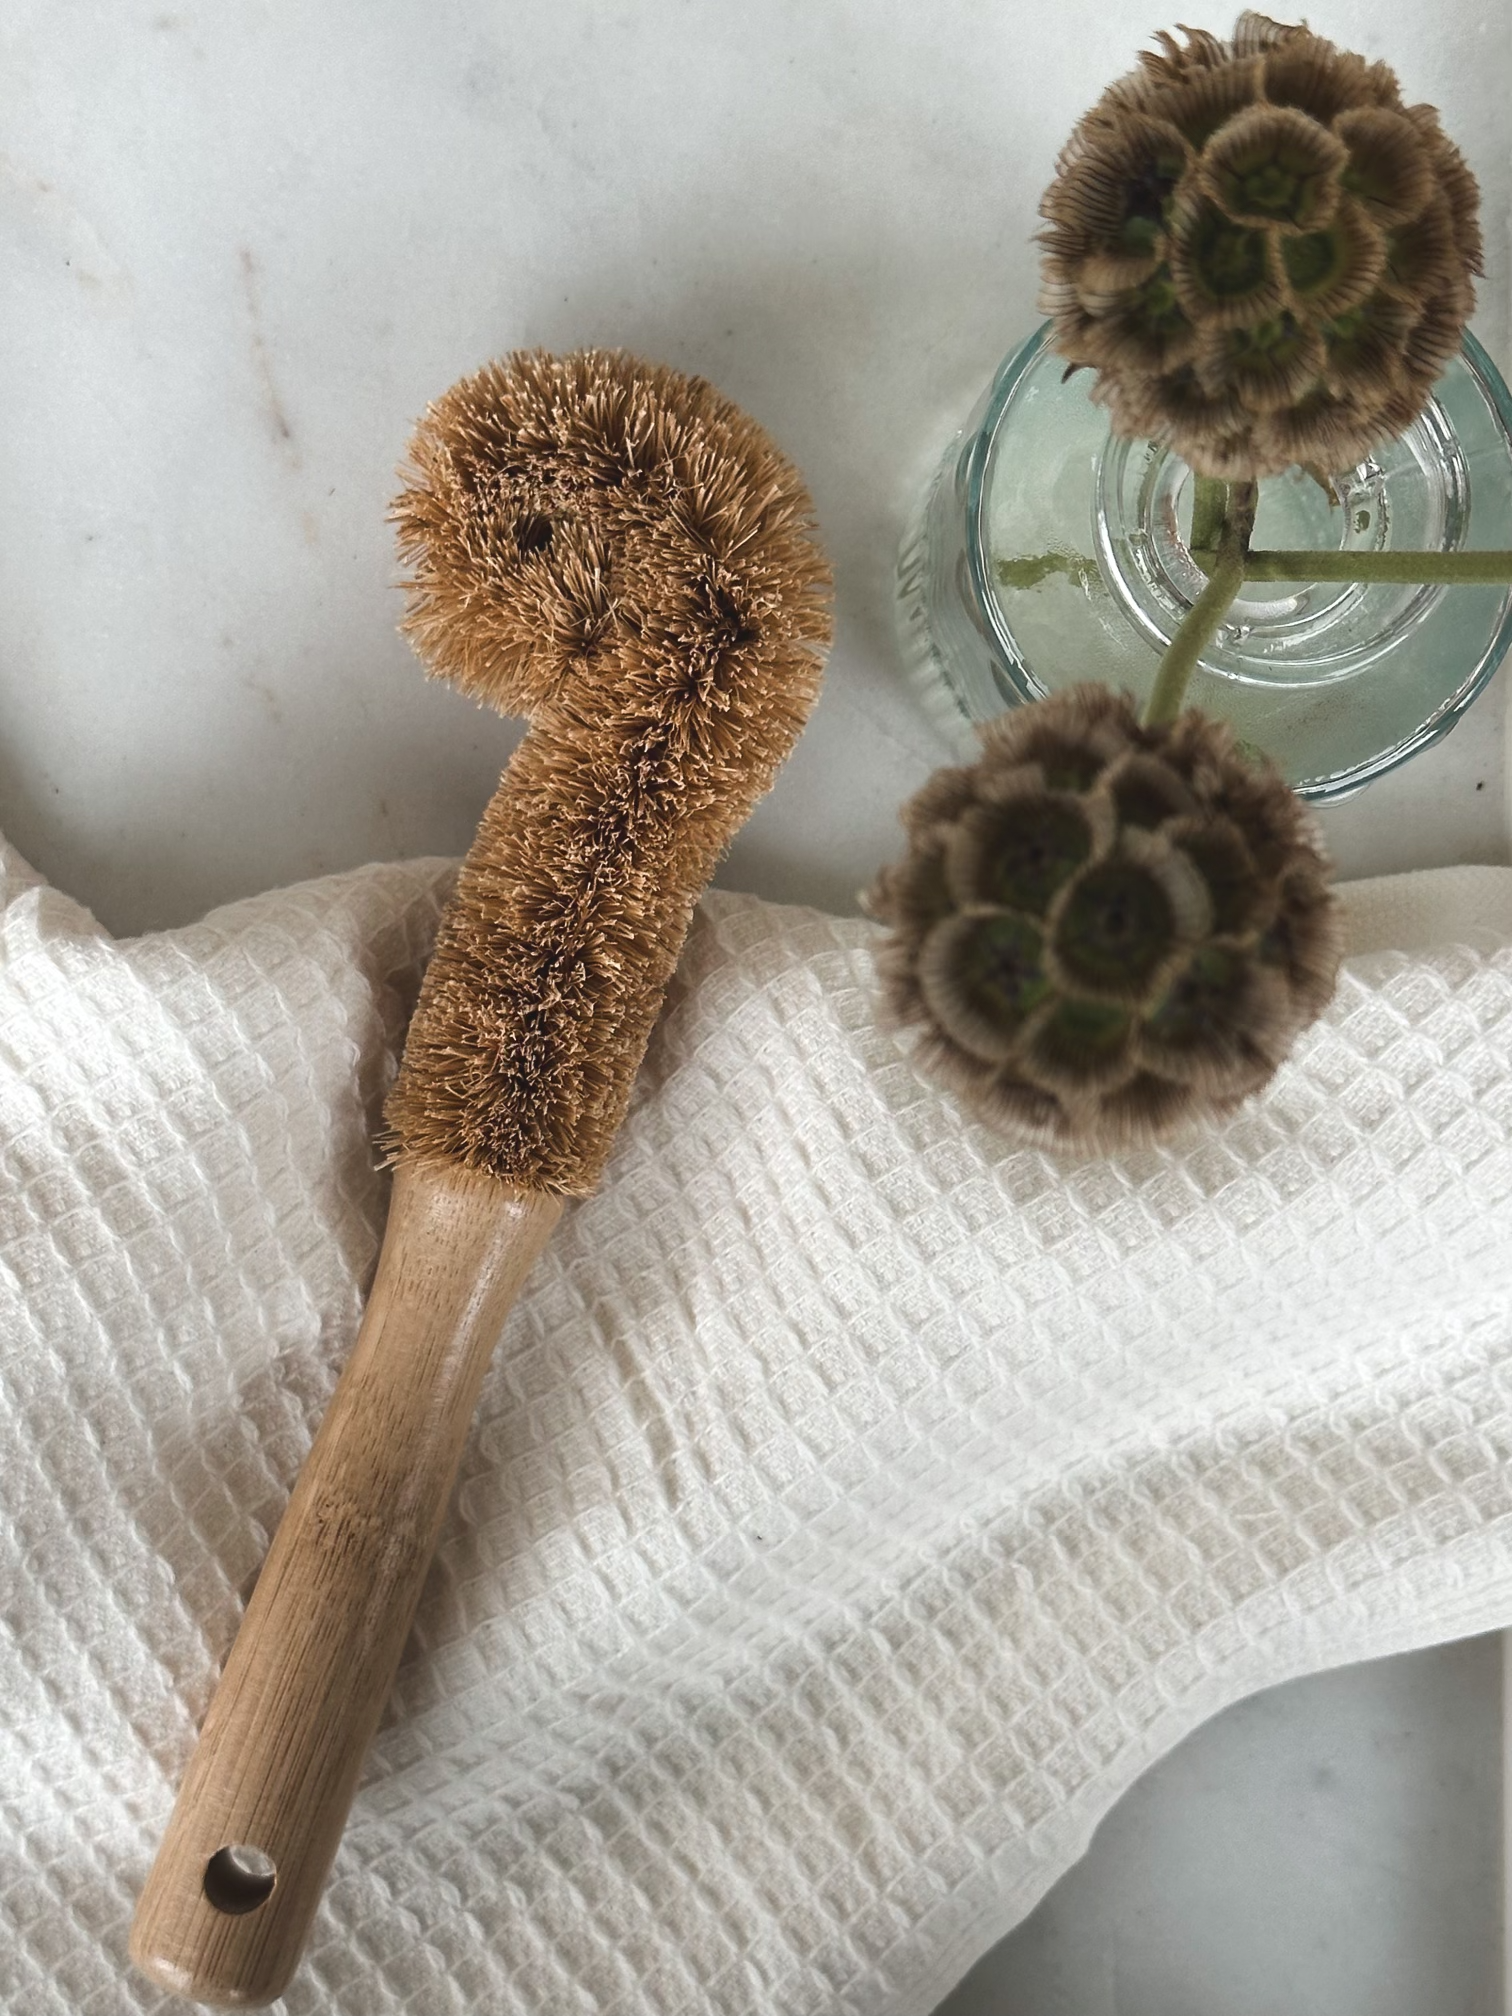 Bottle brush displayed on an ivory towel.